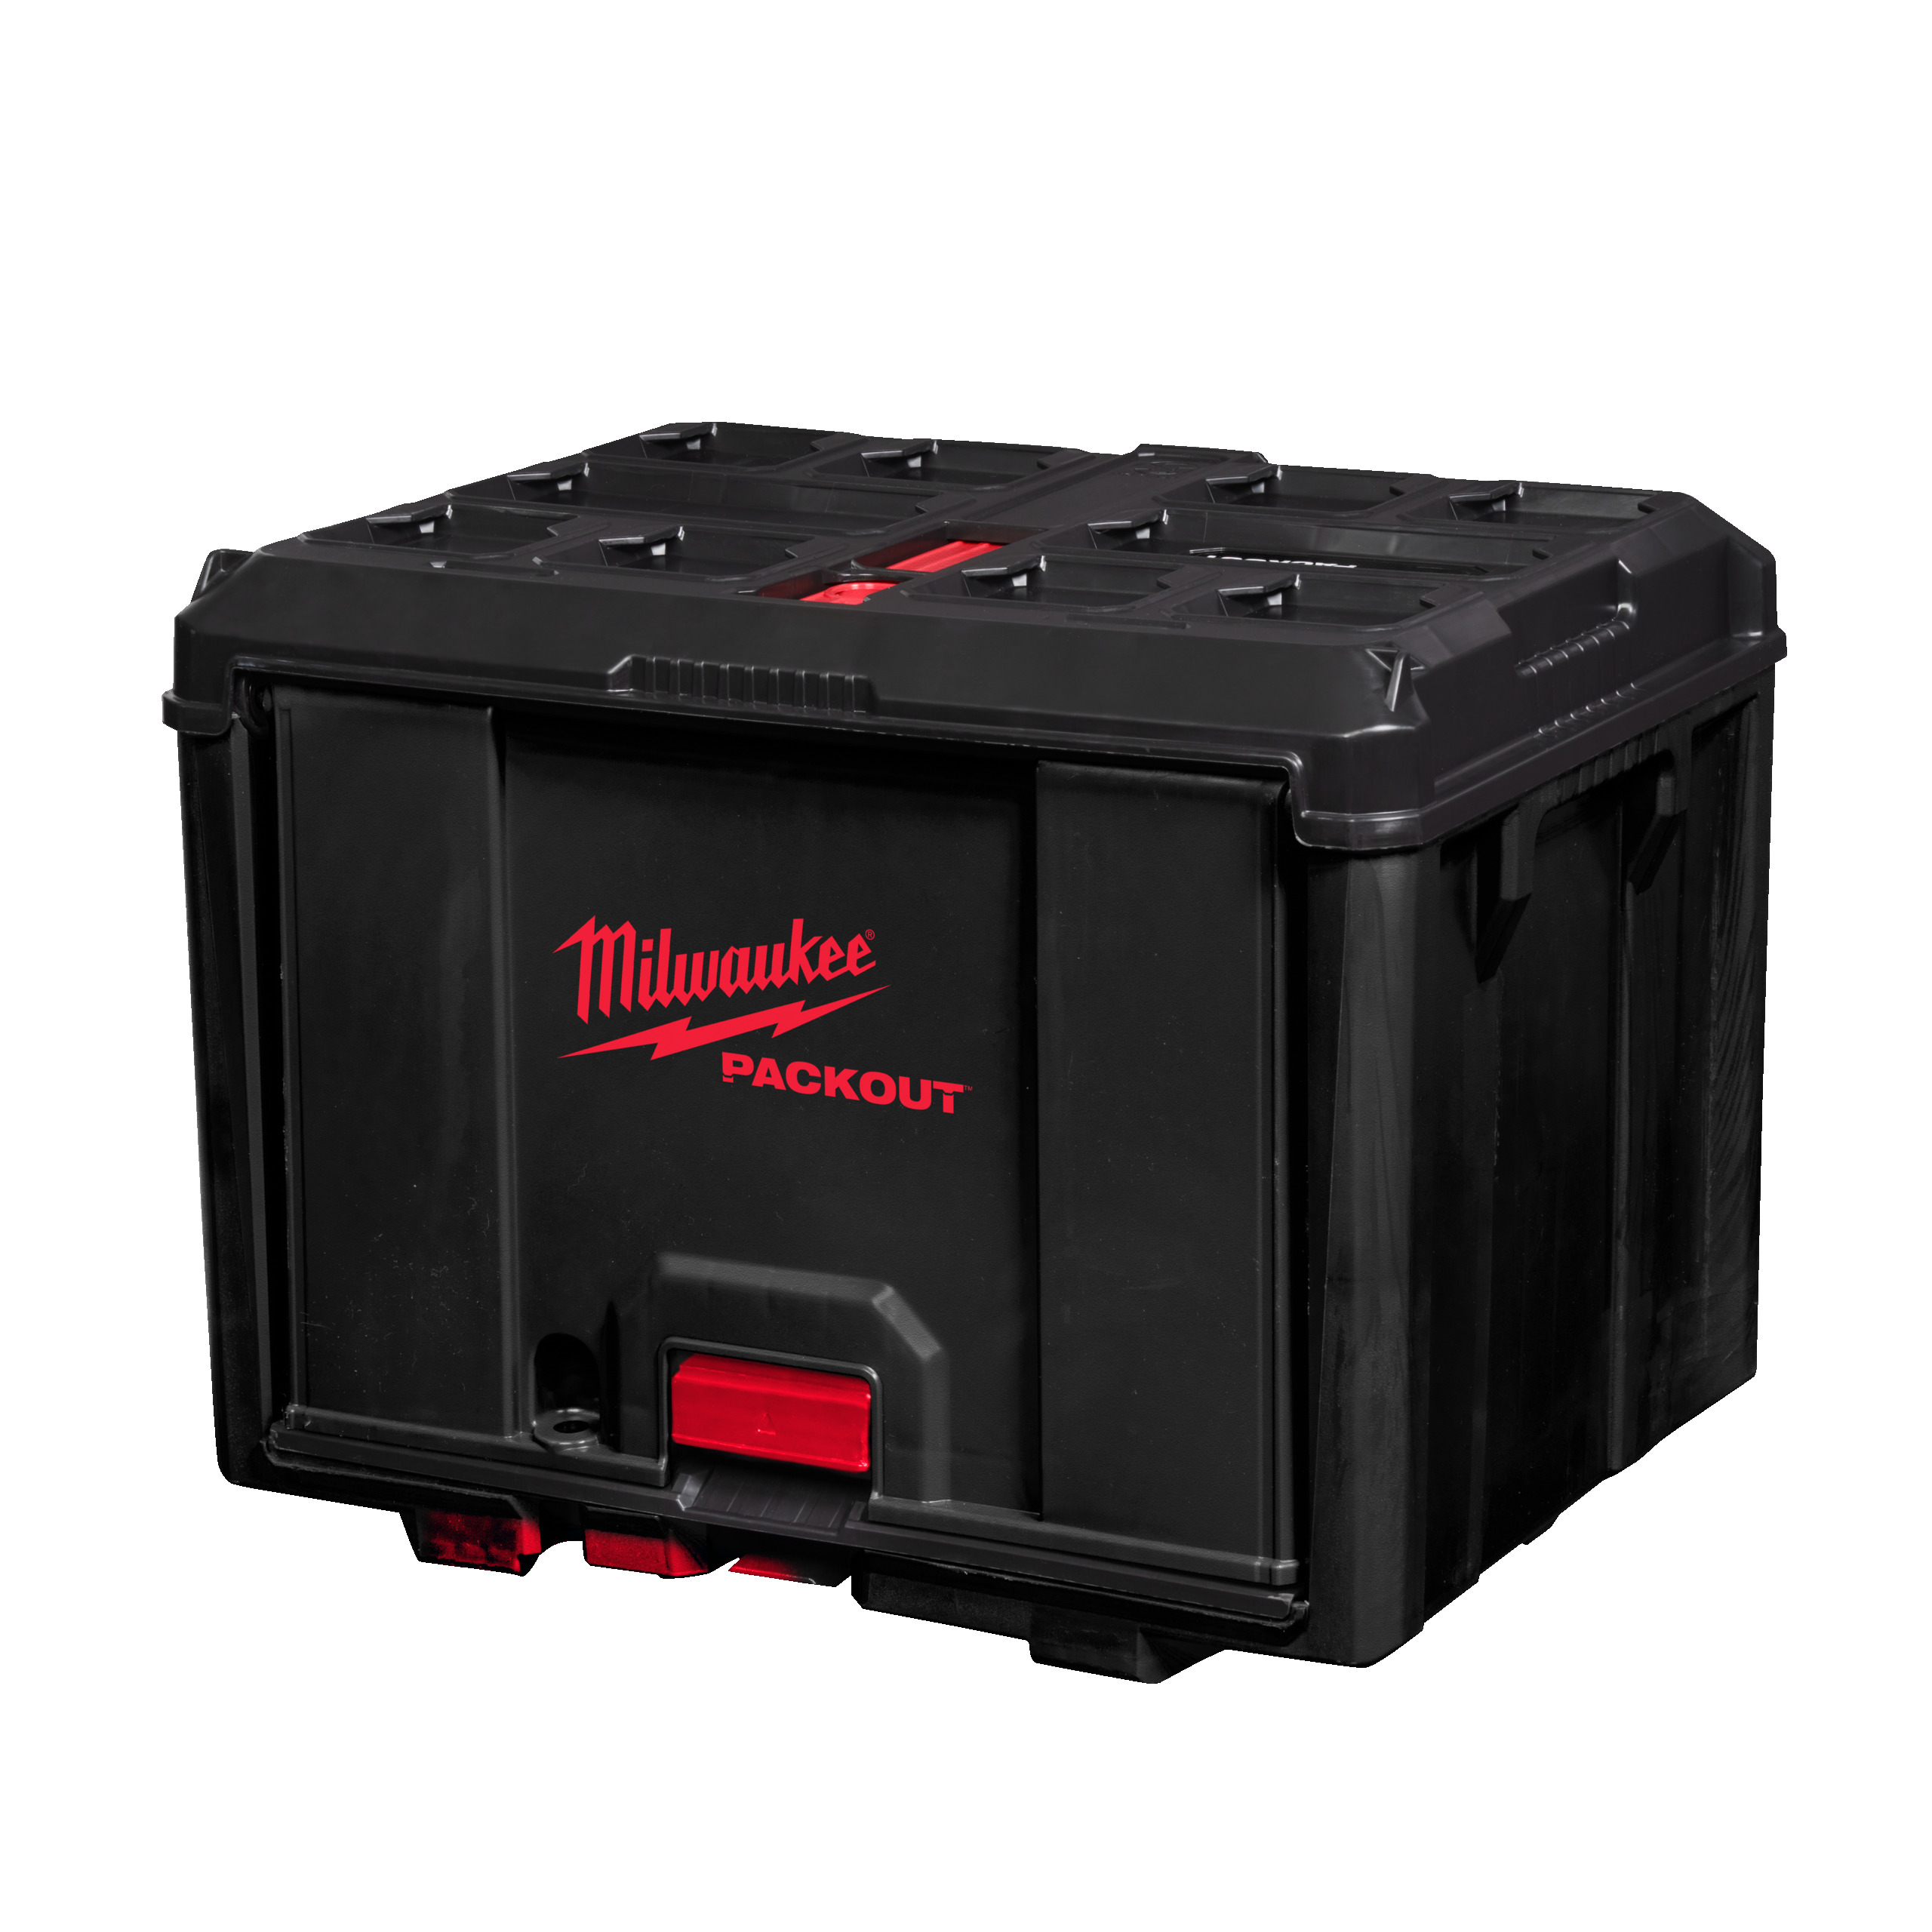 Milwaukee Packout Cabinet 4932480623